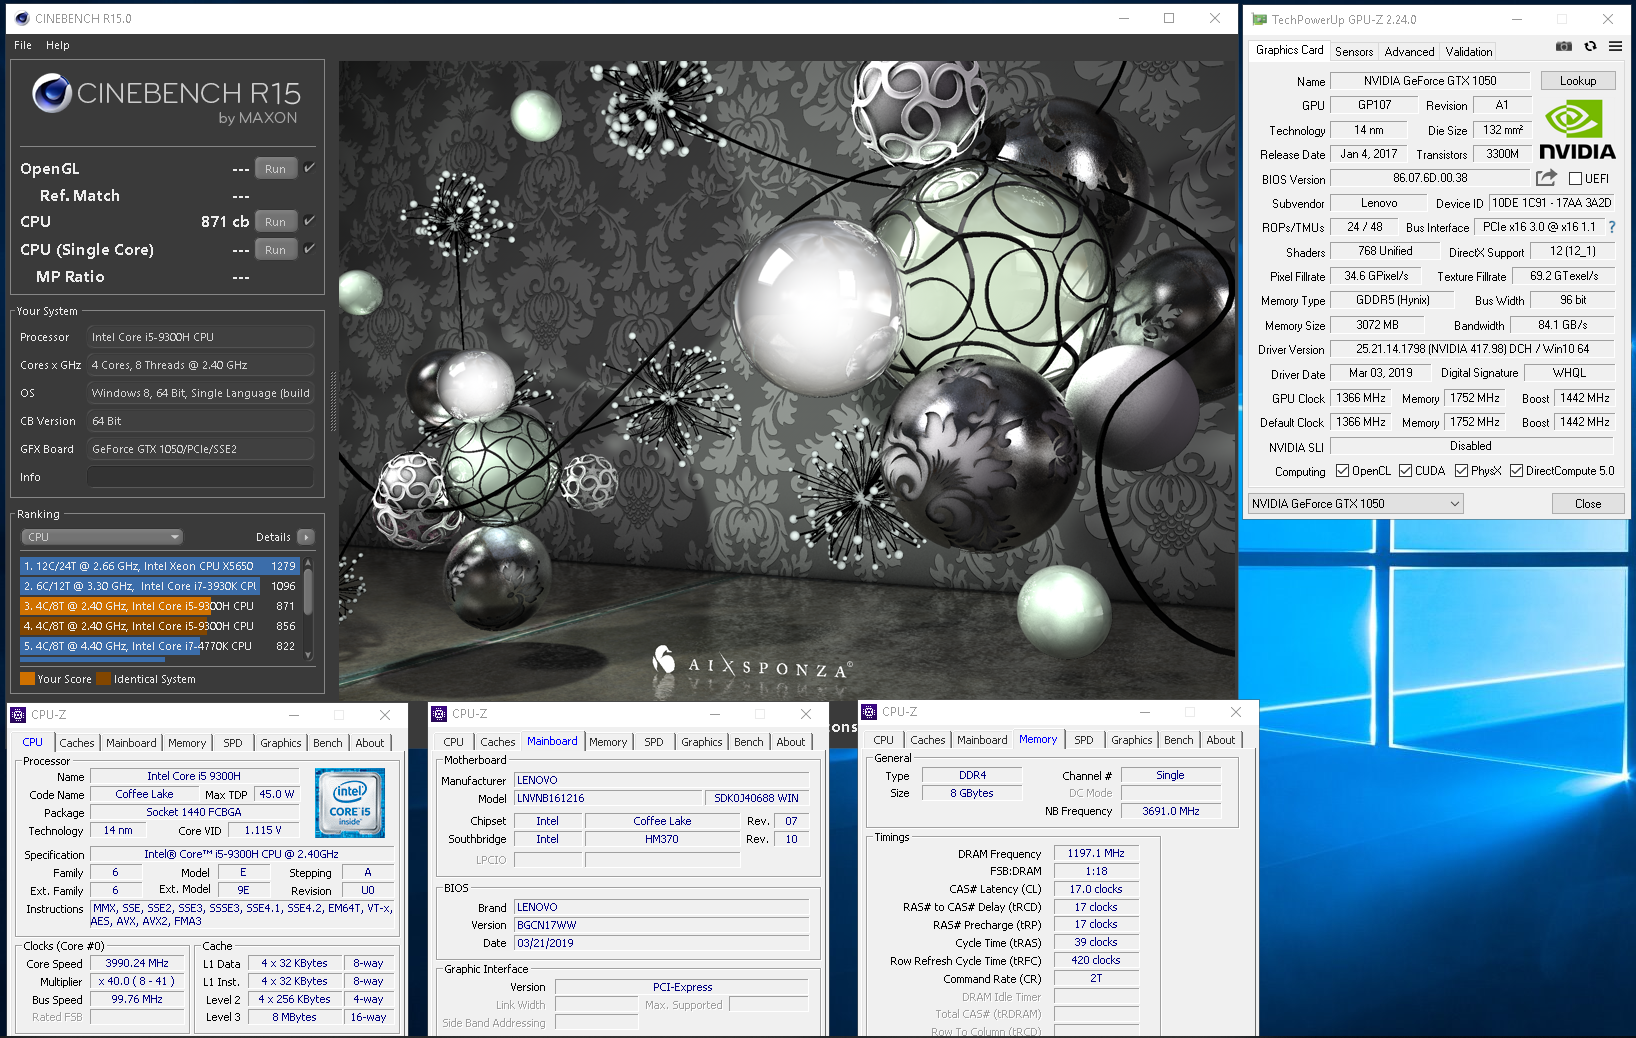 sweepersc`s Cinebench - R15 score: 871 cb with a Core i5 9300H